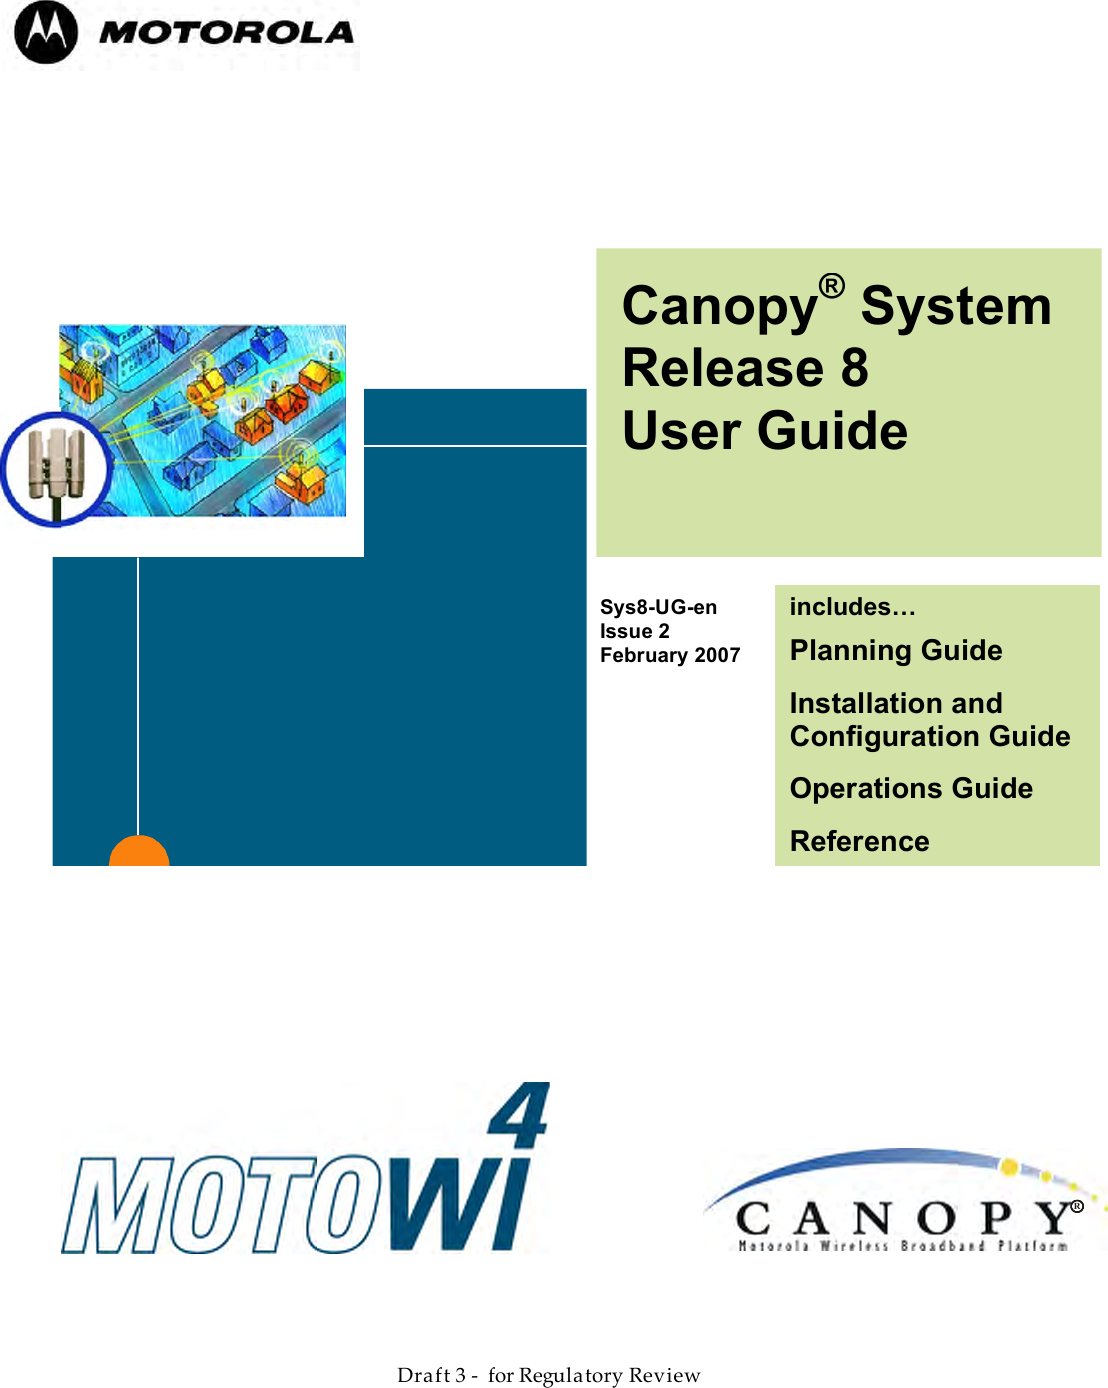                  March 200                  Through Software Release 6.    Draft 3 -  for Regulatory Review         Canopy® System Release 8 User Guide  Sys8-UG-en Issue 2 February 2007    includes… Planning Guide Installation and Configuration Guide Operations Guide Reference Information  R